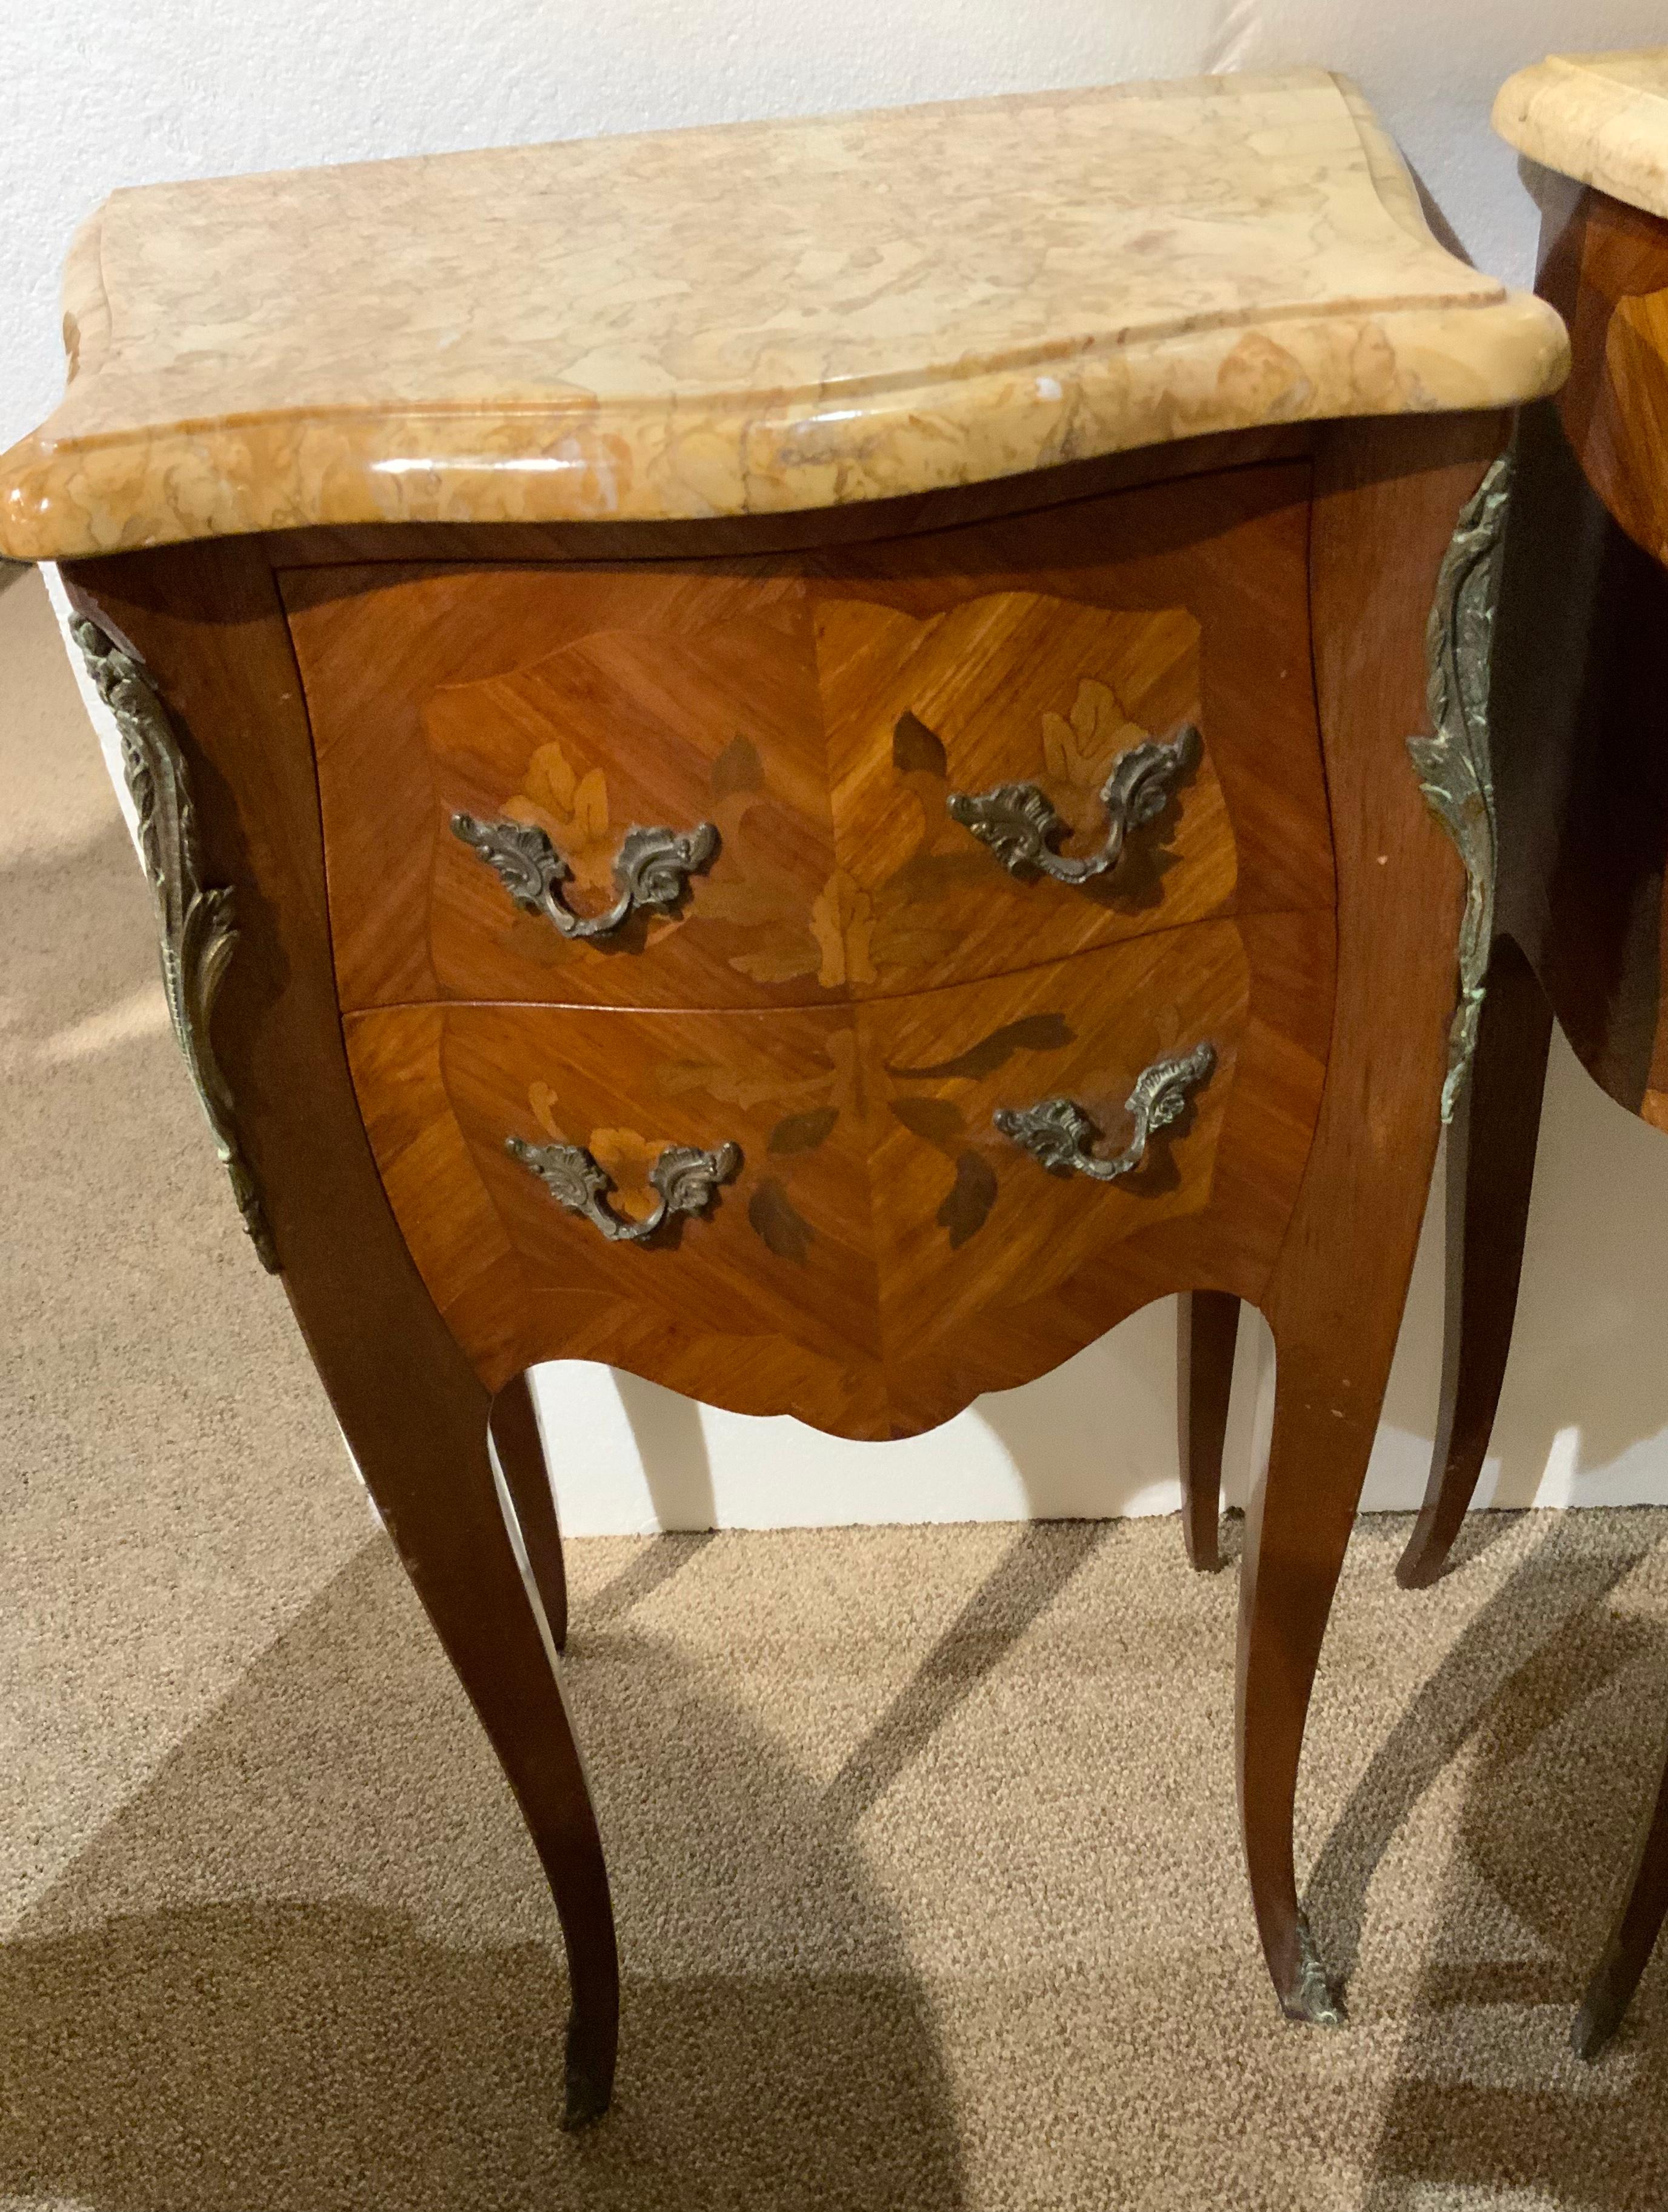 This pair of night stands have original and exceptional finish work.
They have a foliate inlay made of exotic woods. The marble tops
Are in a light gold hue and have no breaks or chips. The legs are
Gracefully curved in the Louis XV style and end